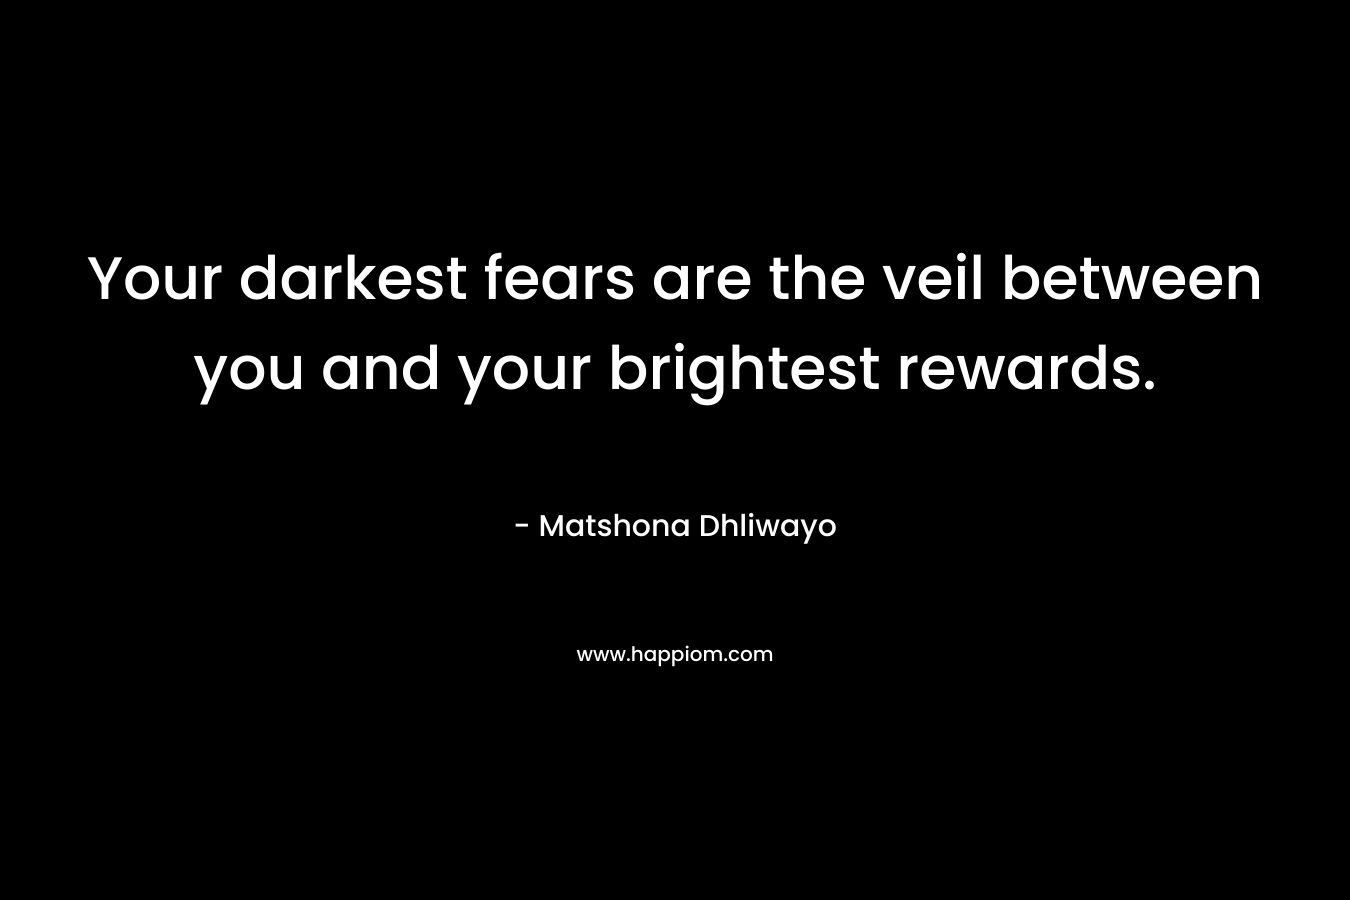 Your darkest fears are the veil between you and your brightest rewards.